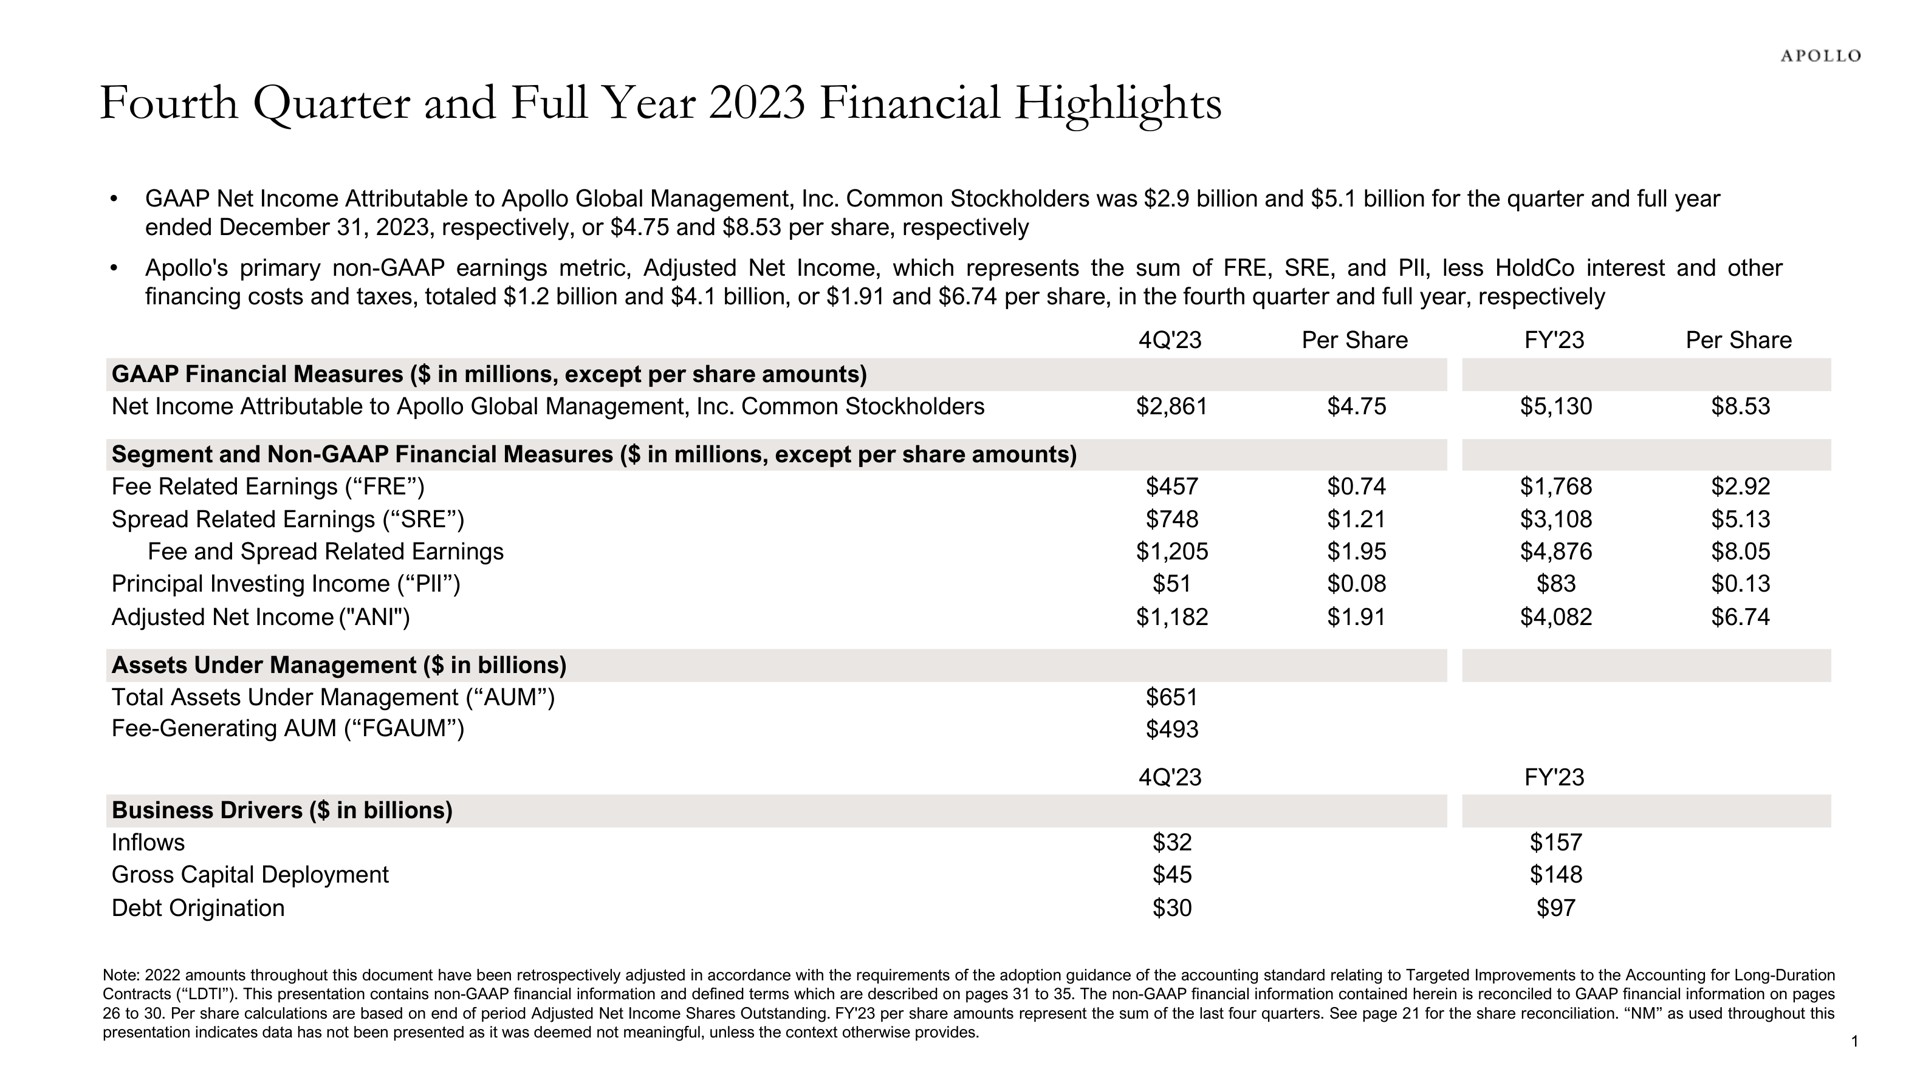 fourth quarter and full year financial highlights | Apollo Global Management